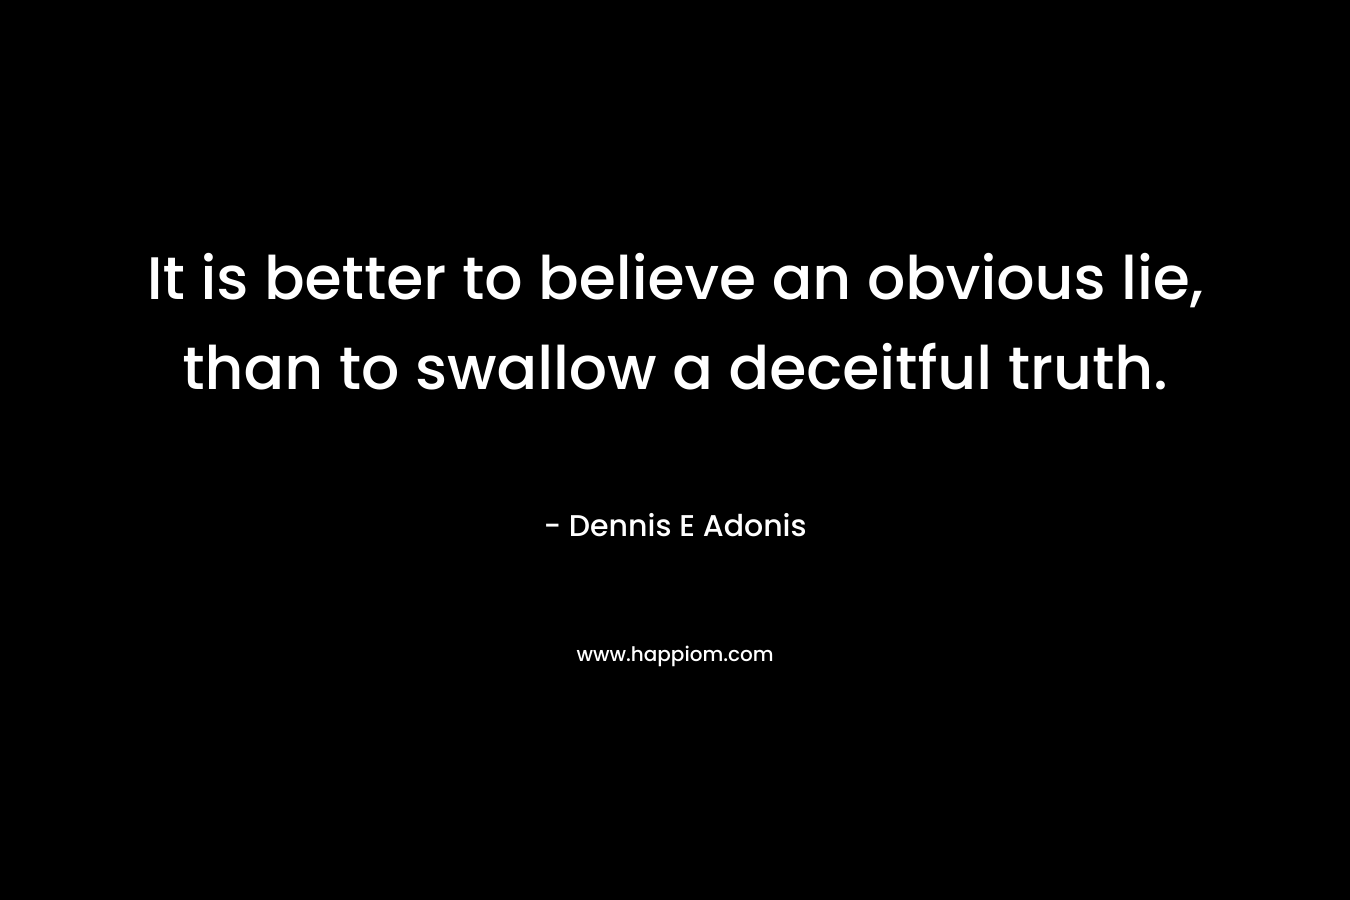 It is better to believe an obvious lie, than to swallow a deceitful truth.